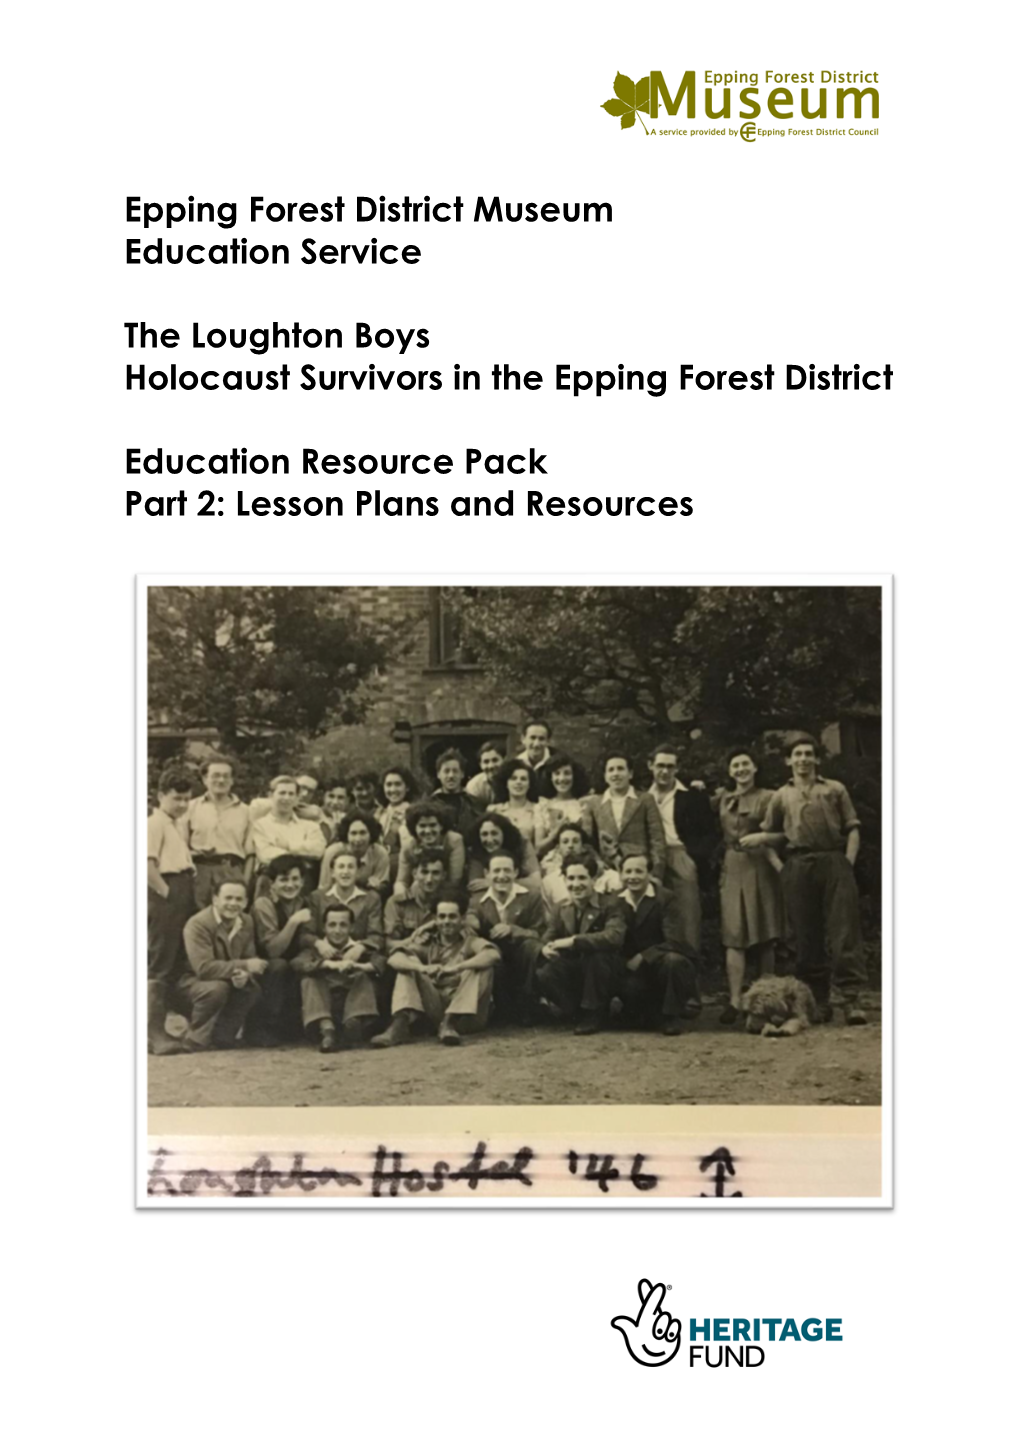 The Loughton Boys Holocaust Survivors in the Epping Forest District